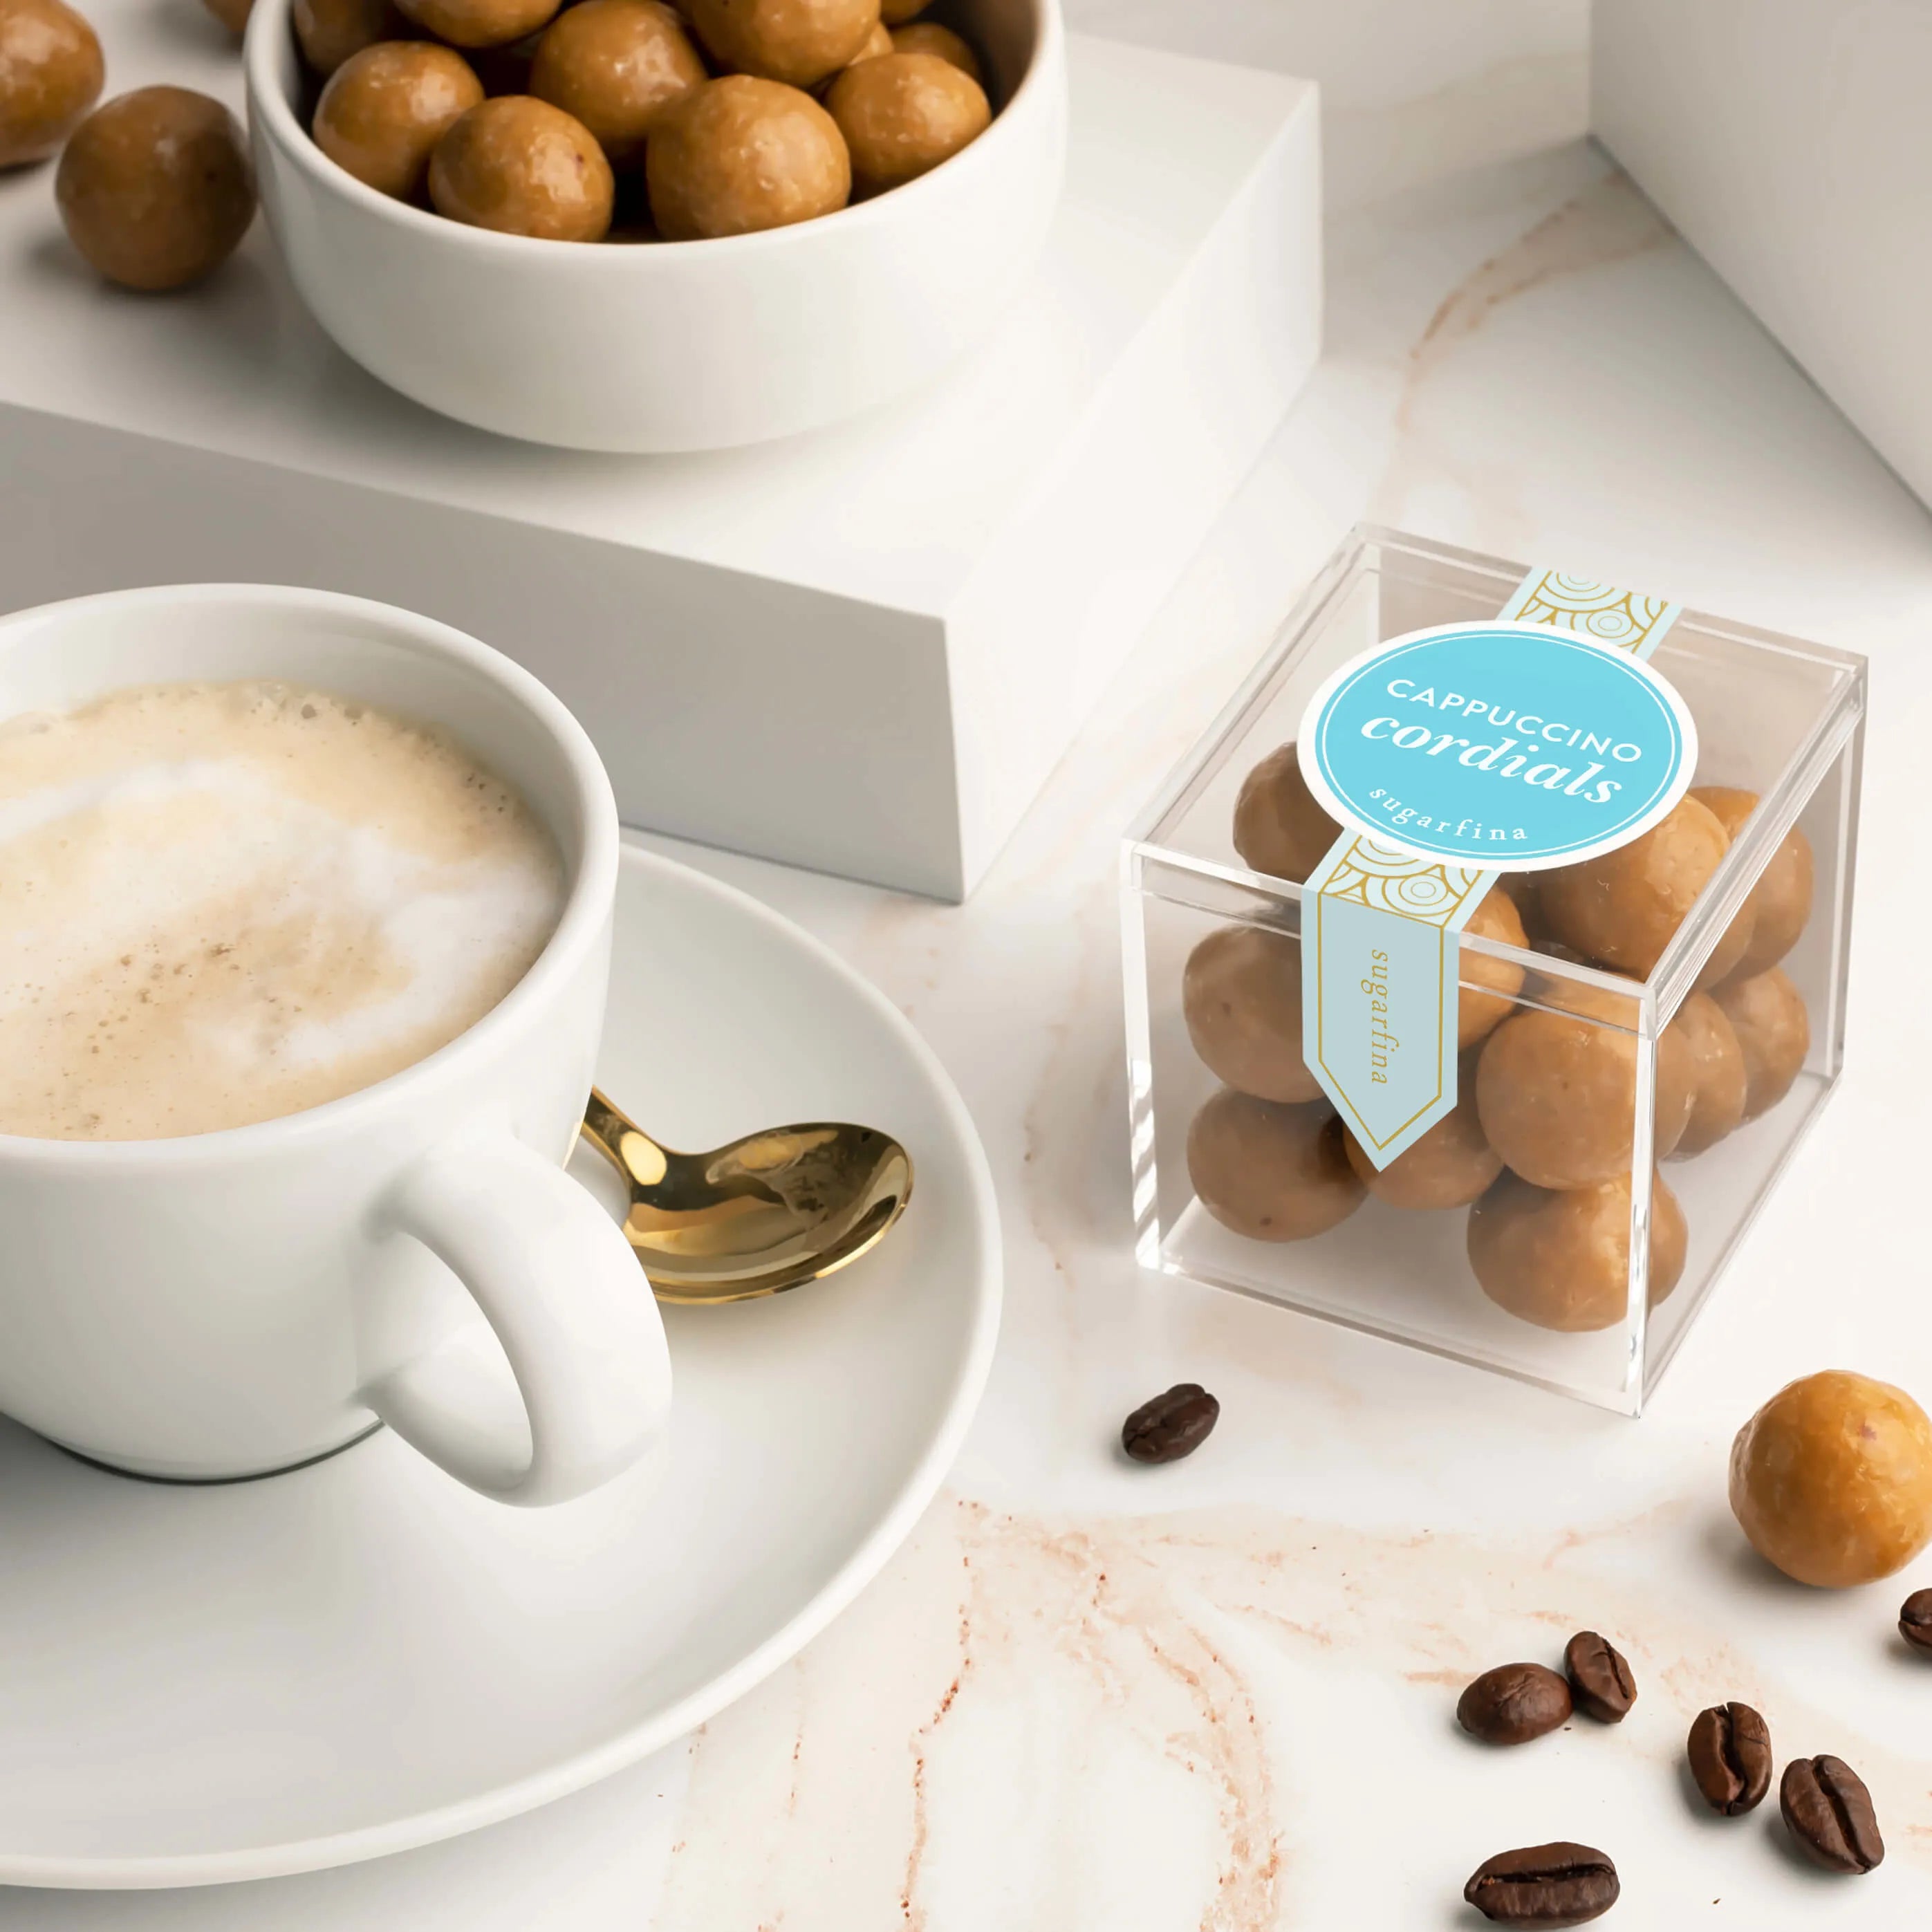 Cappuccino Cordials in dish and in candy cube, next to coffee on saucer